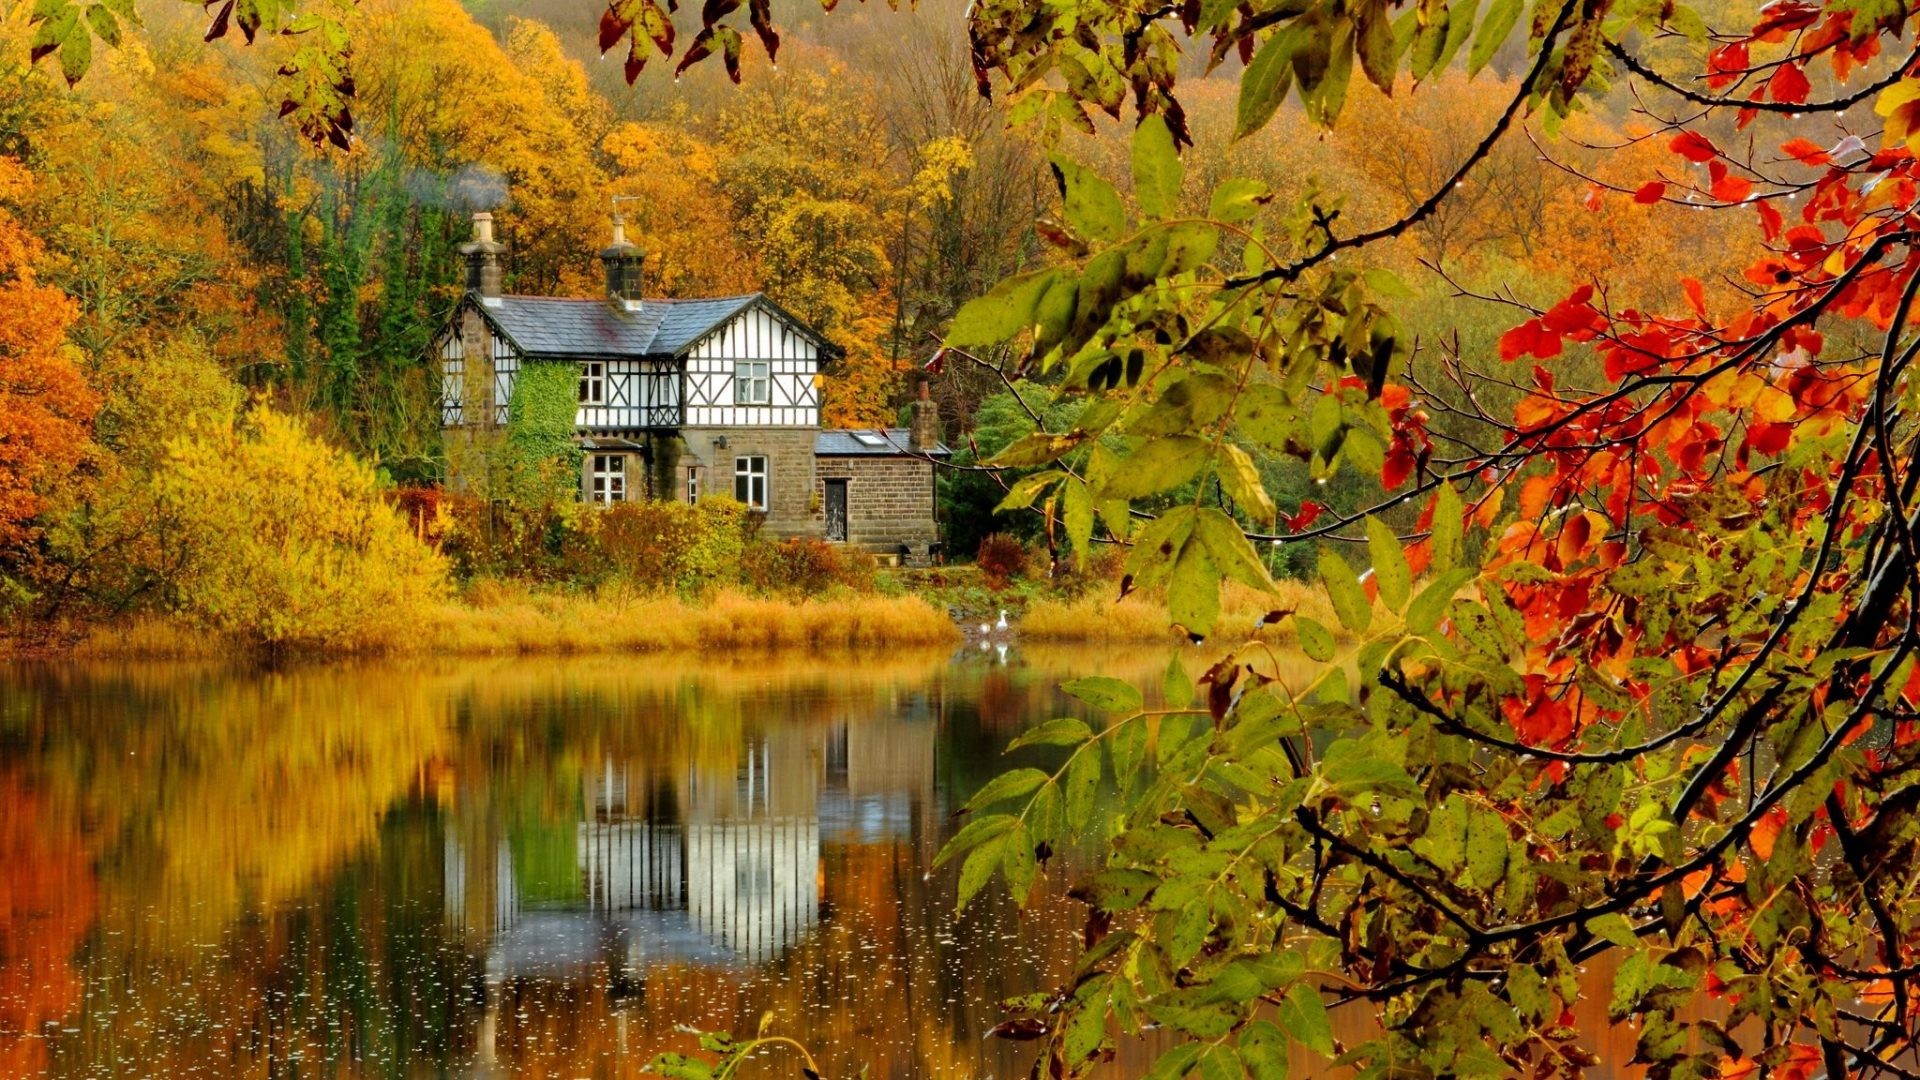 1920x1080 Landscape Tag - House Tree Leaves Nature Lake Reflection Autumn Leaf Forest  Landscape Fall Screensavers Wallpapers